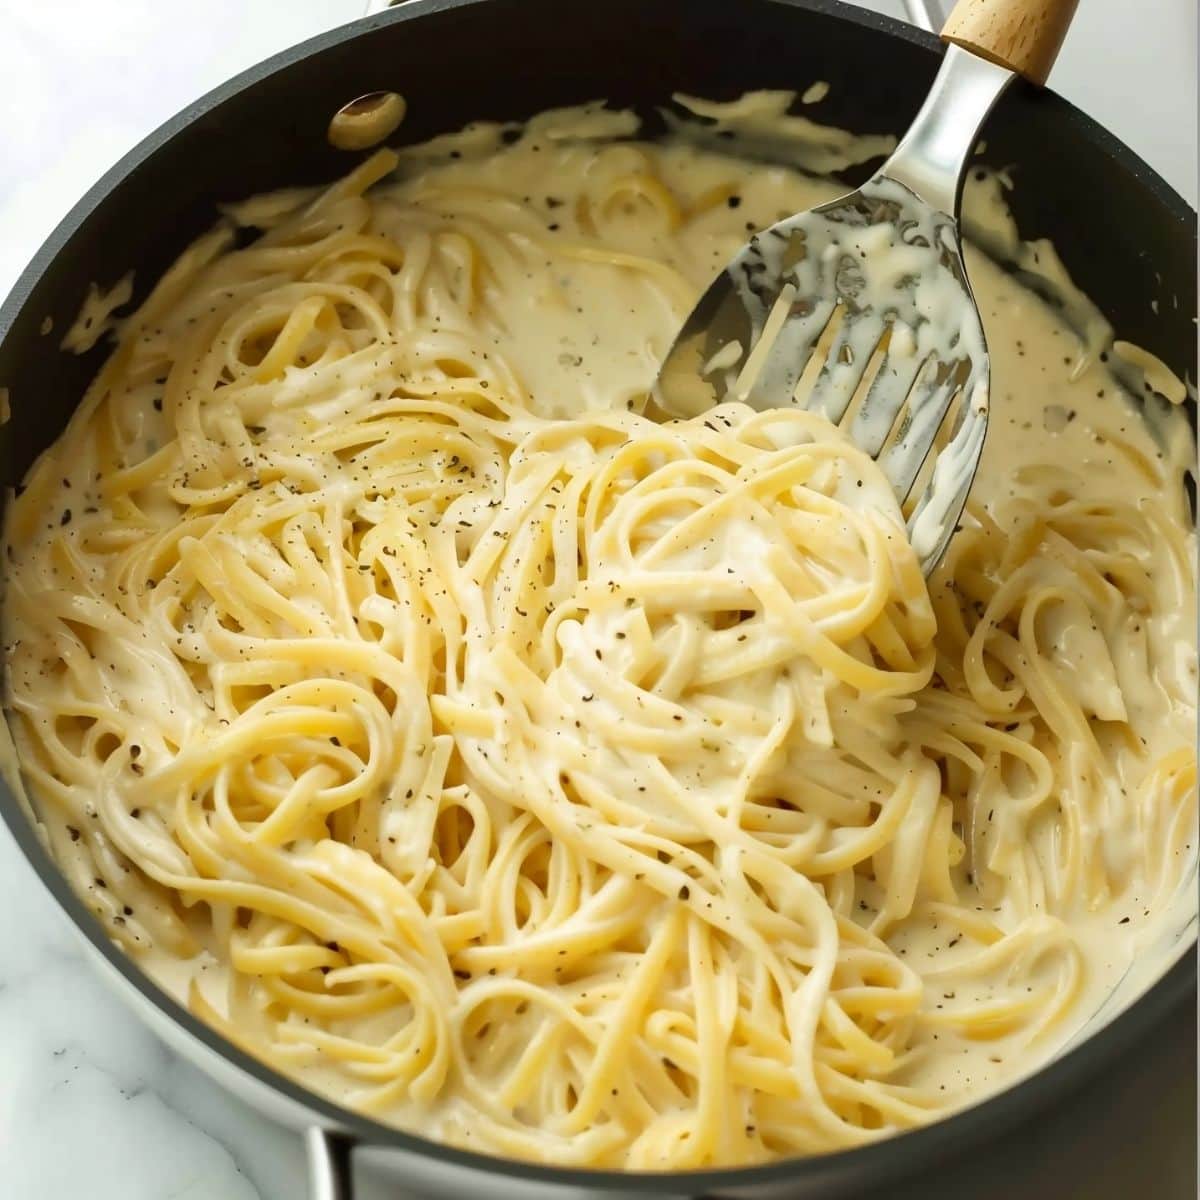 Homemade creamy pasta cooked in a pan